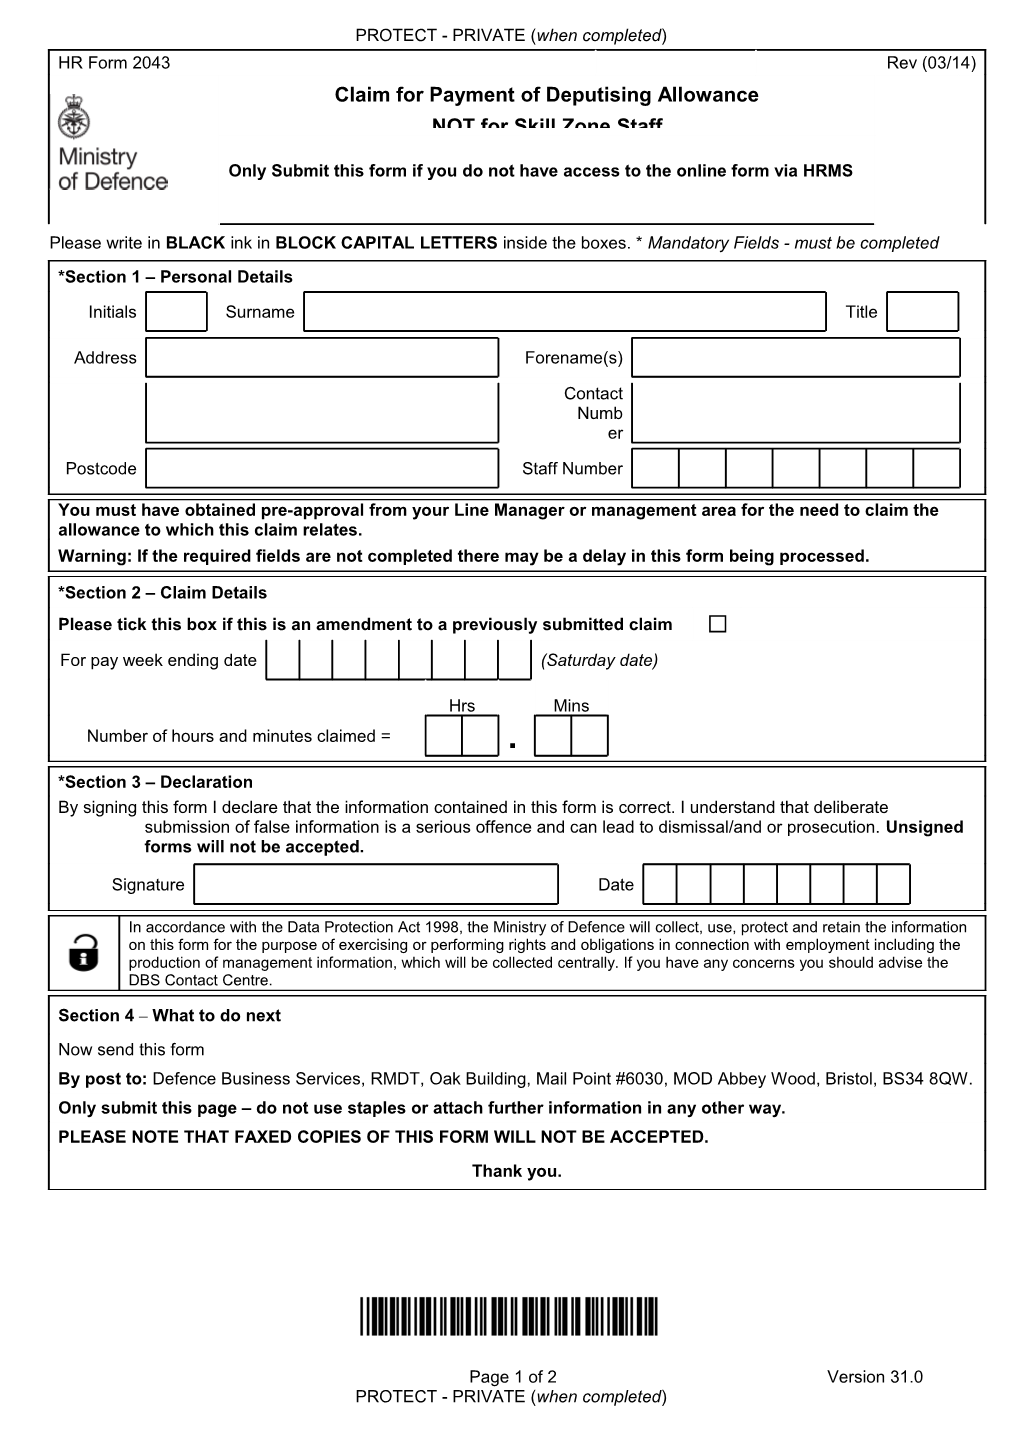 HR Form 2043: Claim for Payment of Deputising Allowance NOT for Skill Zone Staff